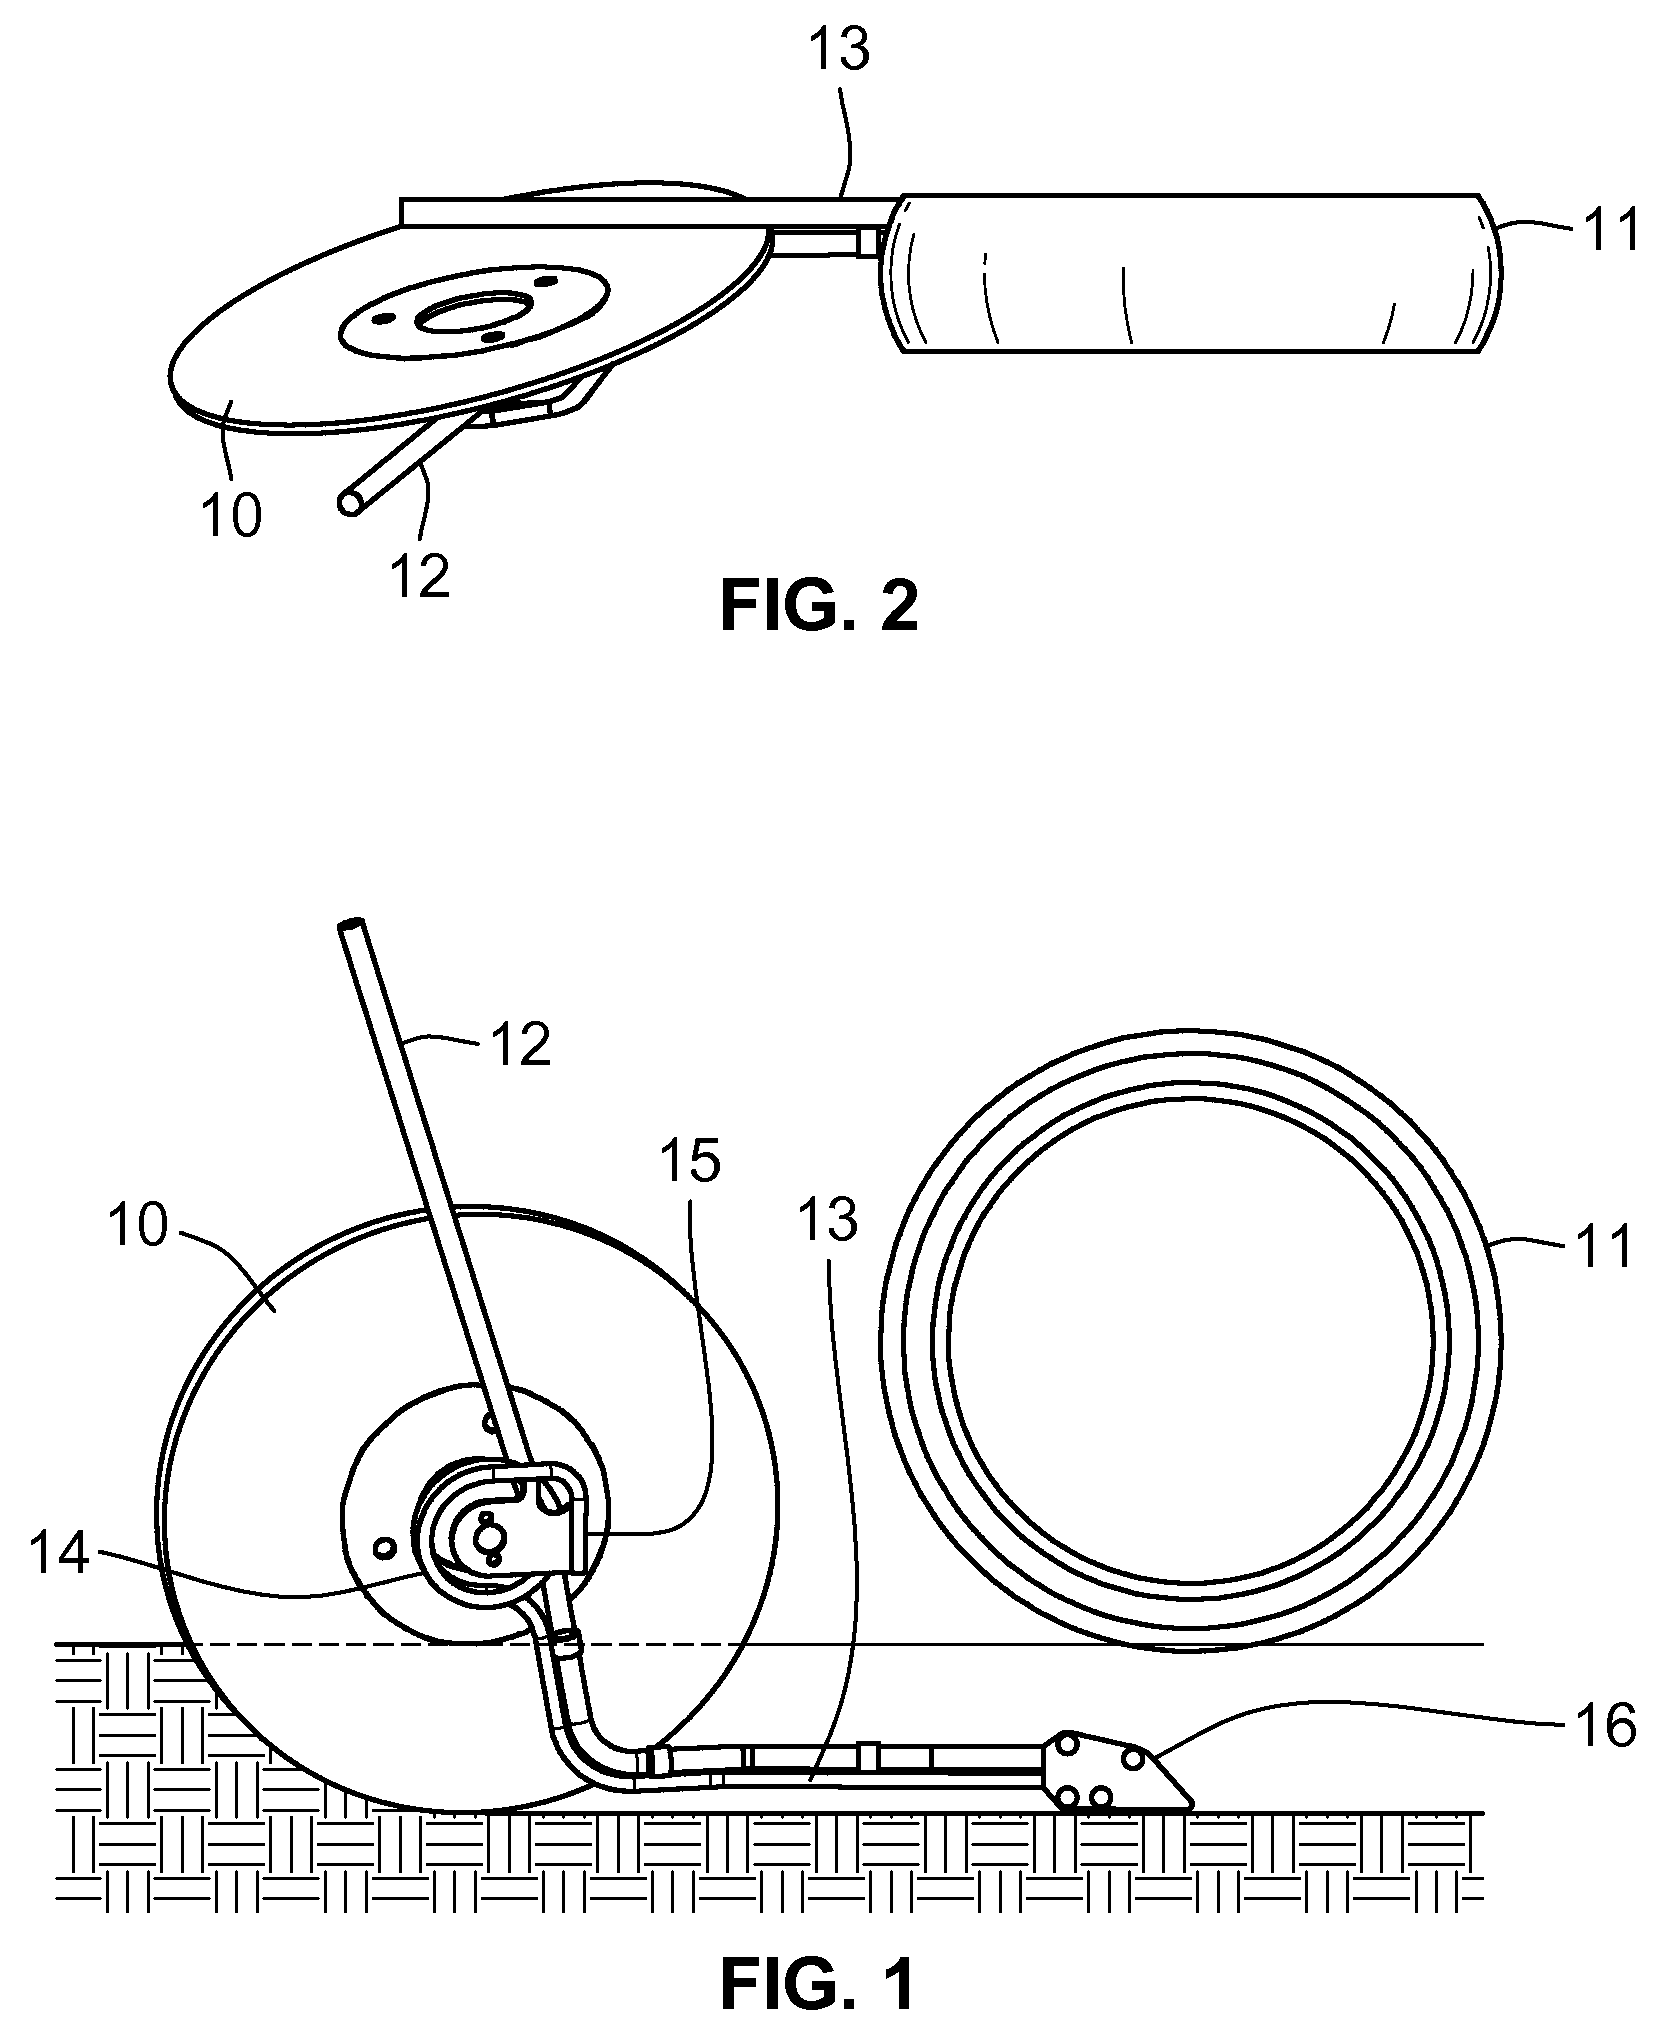 Agricultural implement for delivering ammonia gas to soil